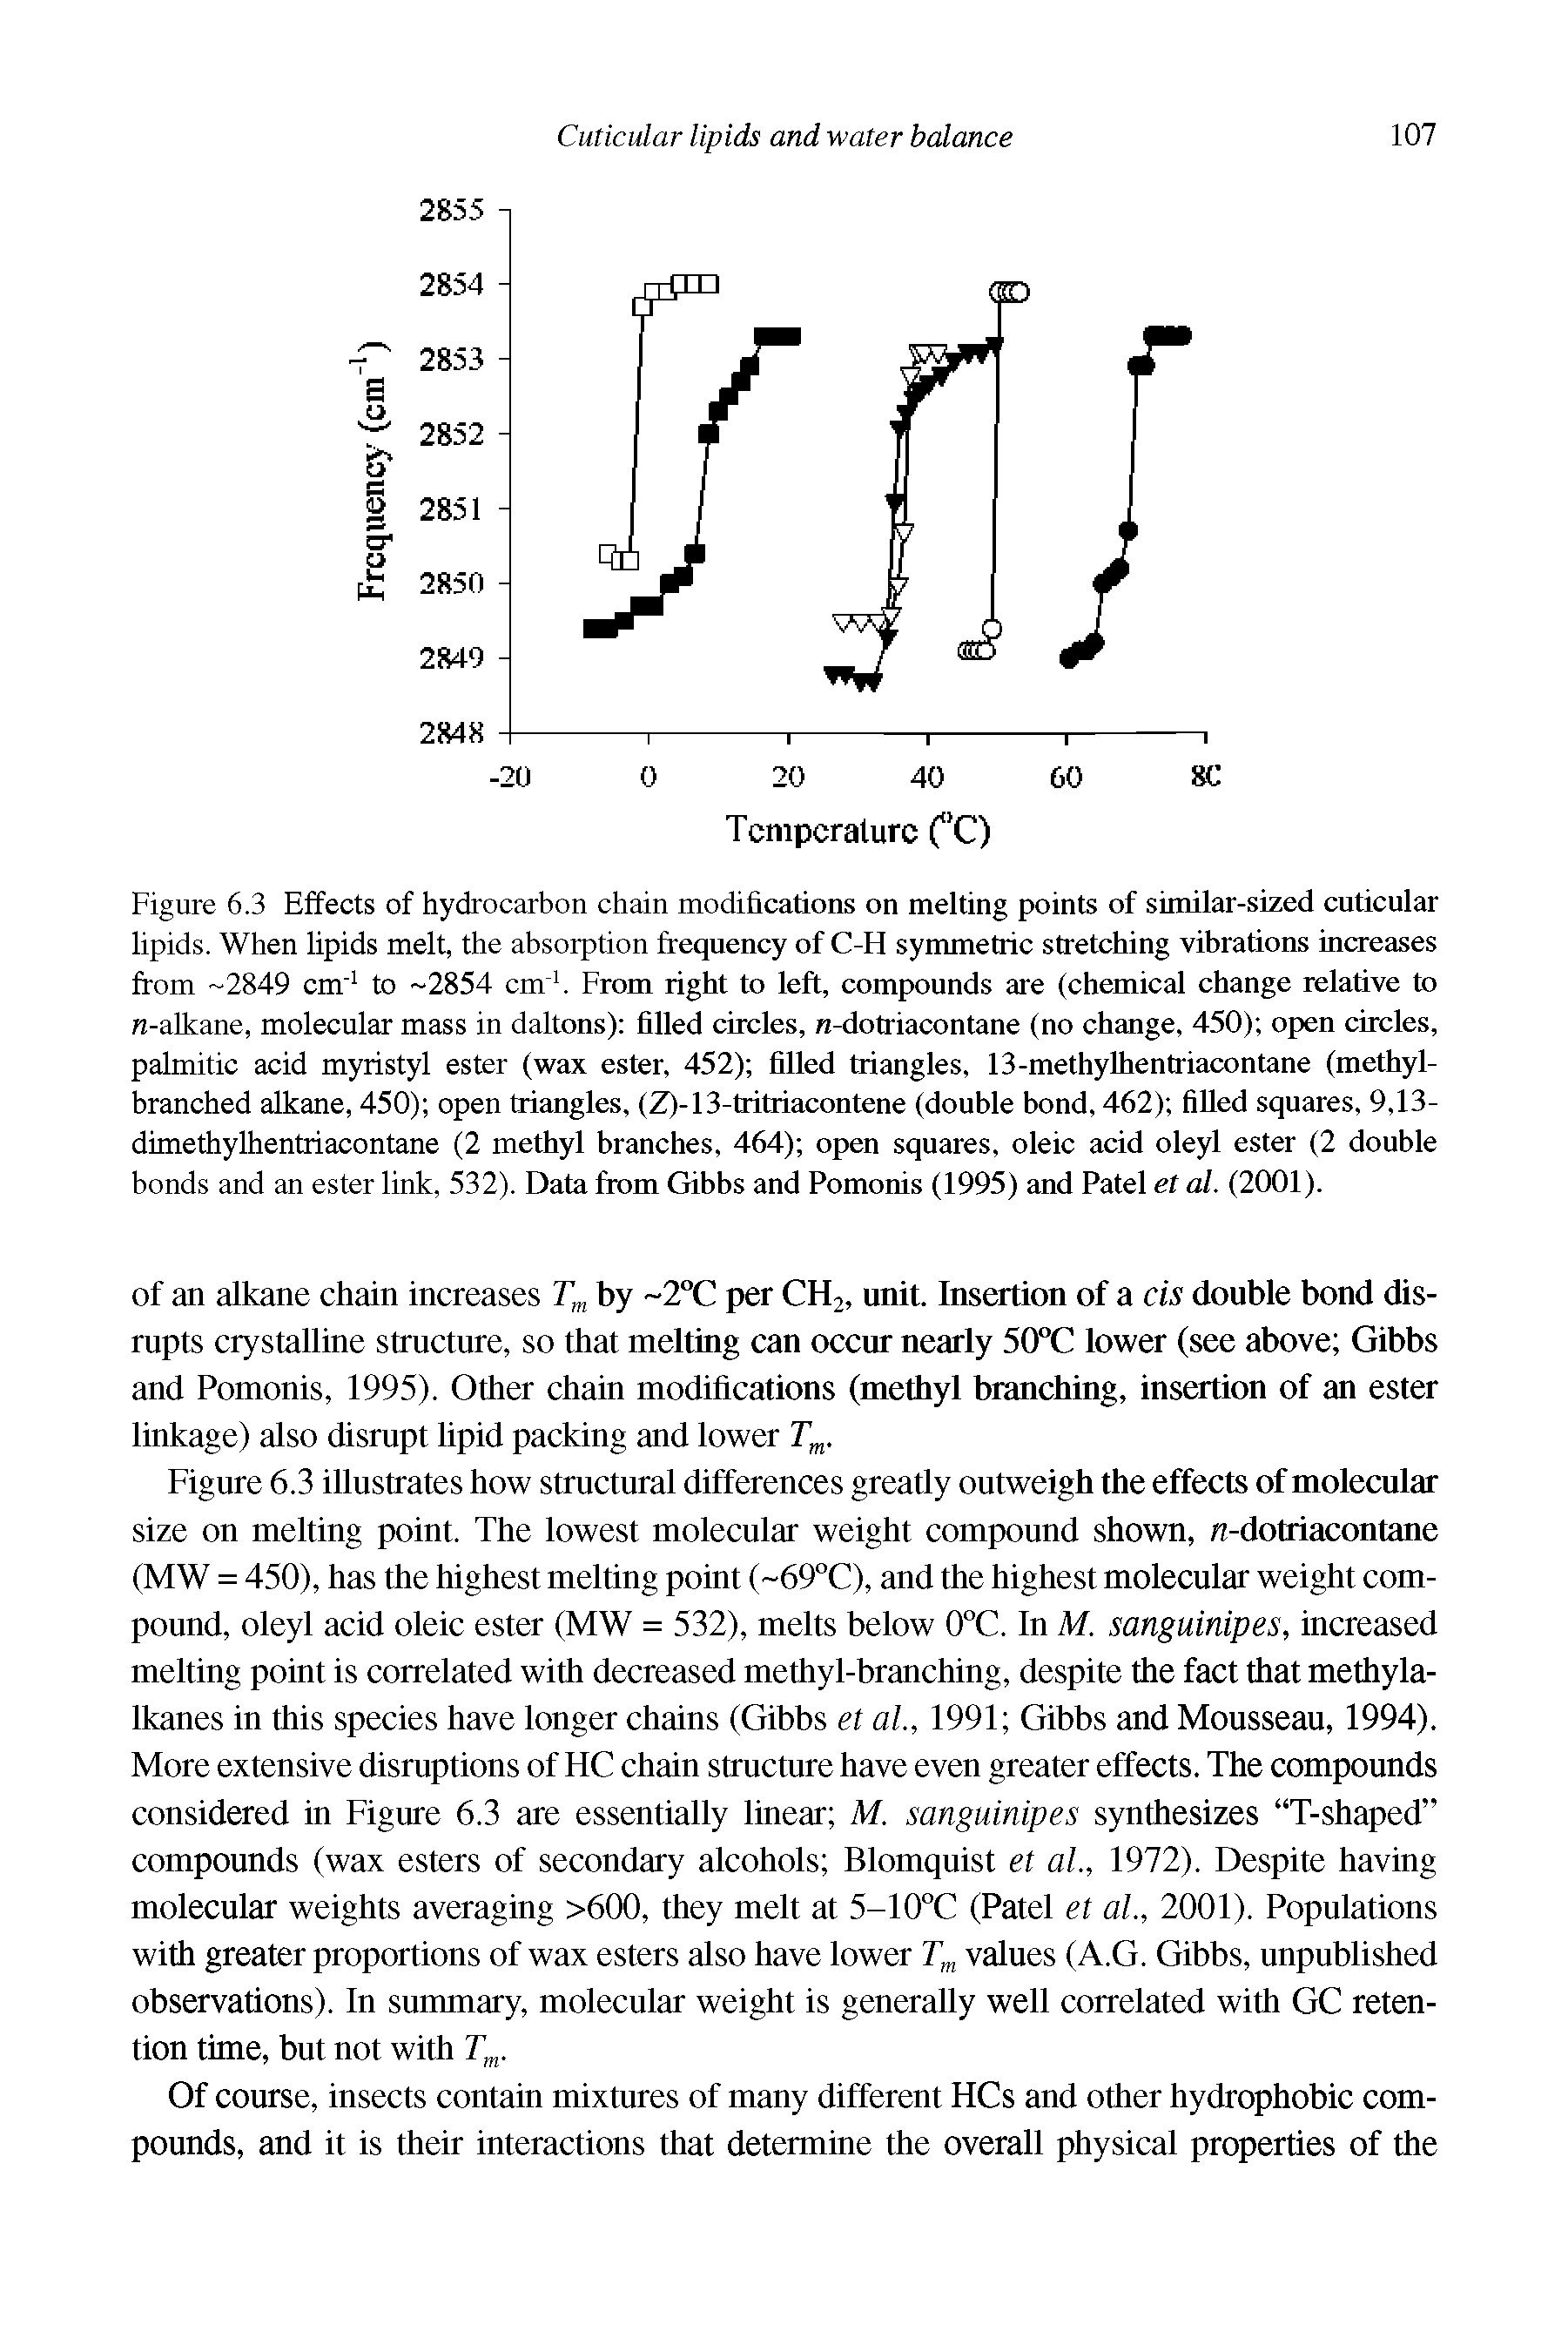 Figure 6.3 Effects of hydrocarbon chain modifications on melting points of similar-sized cuticular lipids. When lipids melt, the absorption frequency of C-H symmetric stretching vibrations increases from -2849 cm1 to -2854 cm4. From right to left, compounds are (chemical change relative to n-alkane, molecular mass in daltons) filled circles, n-dotnacontane (no change, 450) open circles, palmitic acid myristyl ester (wax ester, 452) filled triangles, 13-methylhentriacontane (methyl-branched alkane, 450) open triangles, (Z)-13-tritriacontene (double bond, 462) filled squares, 9,13-dimethylhentriacontane (2 methyl branches, 464) open squares, oleic acid oleyl ester (2 double bonds and an ester link, 532). Data from Gibbs and Pomonis (1995) and Patel el al. (2001).